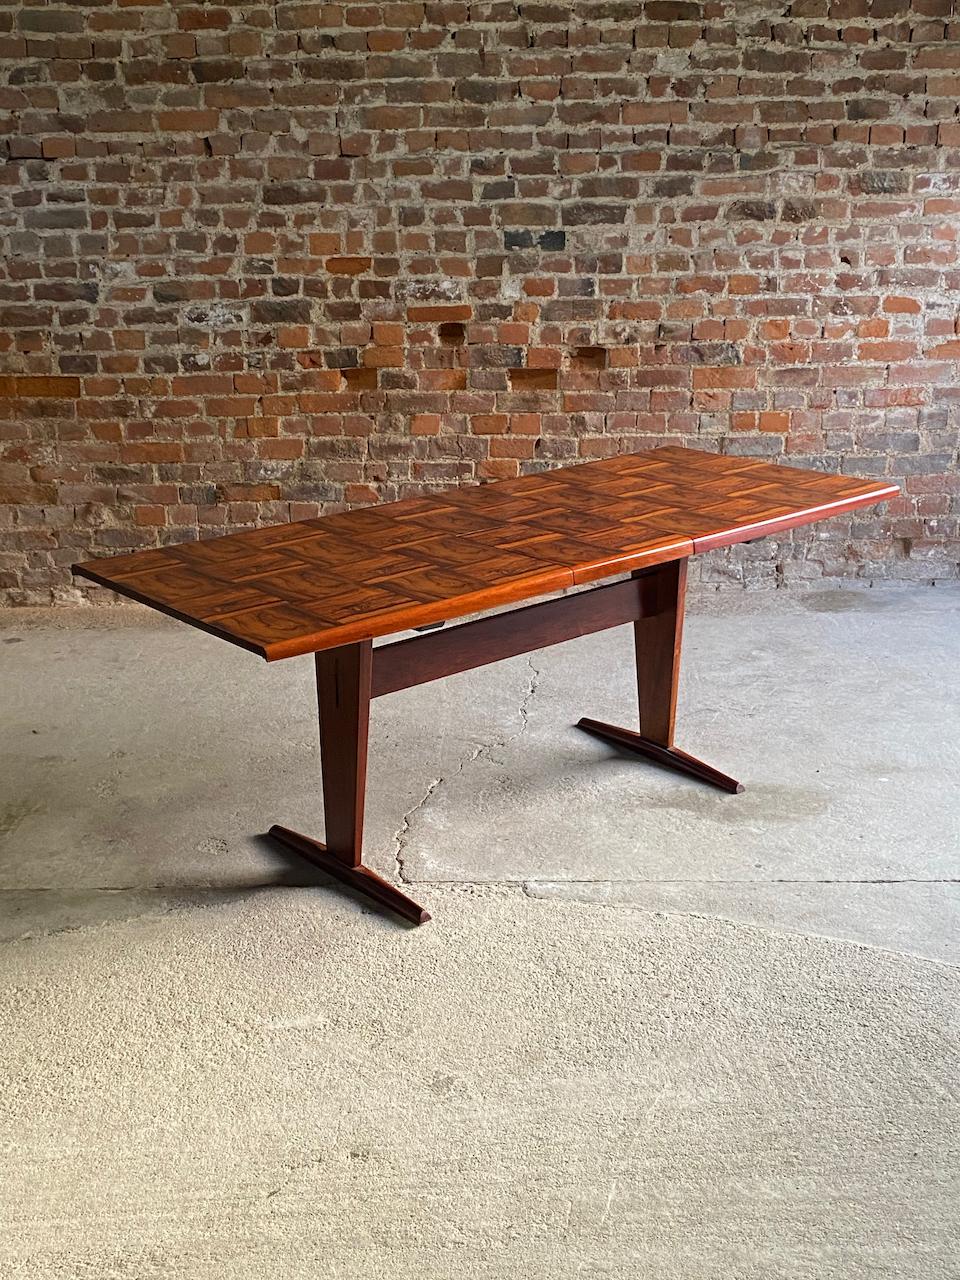 Guiseppe Scapinelli Parquetry rosewood dining table Brazil 1950

Magnificent Guiseppe Scapinelli Parquetry Jacaranda Rosewood extending dining table Sao Paulo, Brazil, 1950s, the rectangular extending pull apart table top with chequered Jacaranda